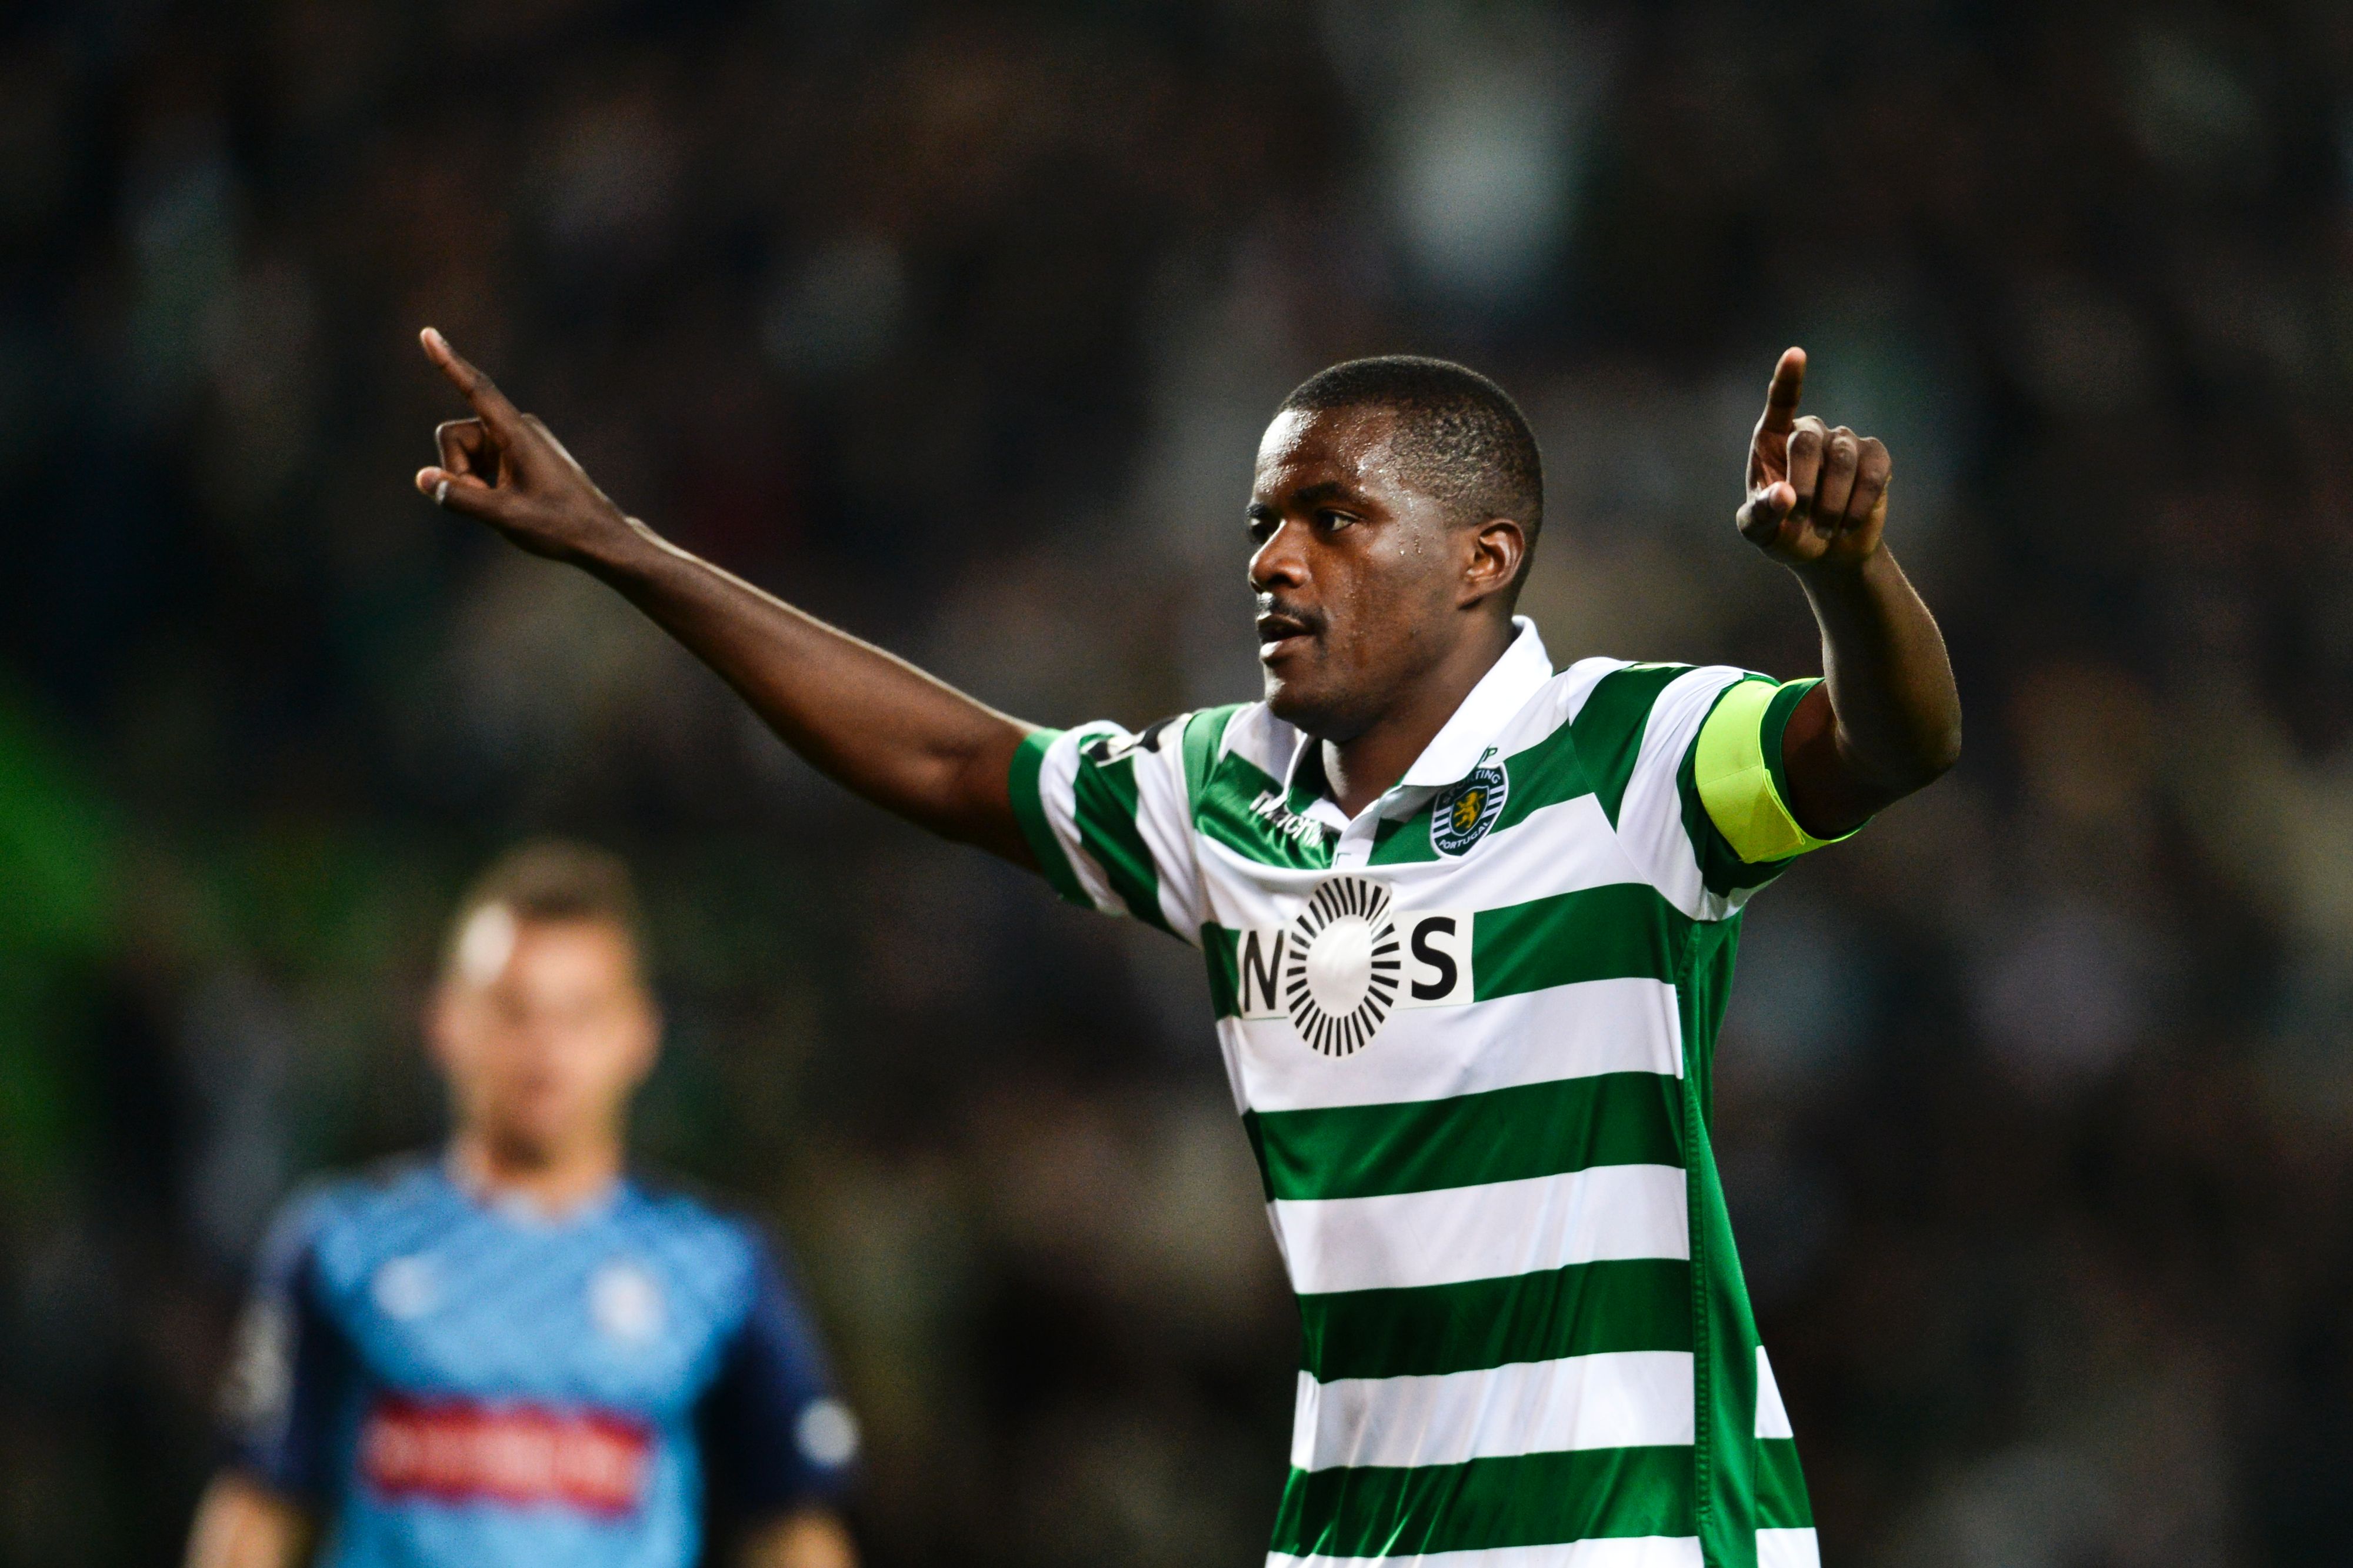 Sporting's midfielder William Carvalho celebrates after scoring during the Portuguese league football match Sporting CP vs CS Maritimo at the Jose Alvalade stadium in Lisbon on April 9, 2016. (Photo by Patricia de Melo Moreira/AFP/Getty Images)